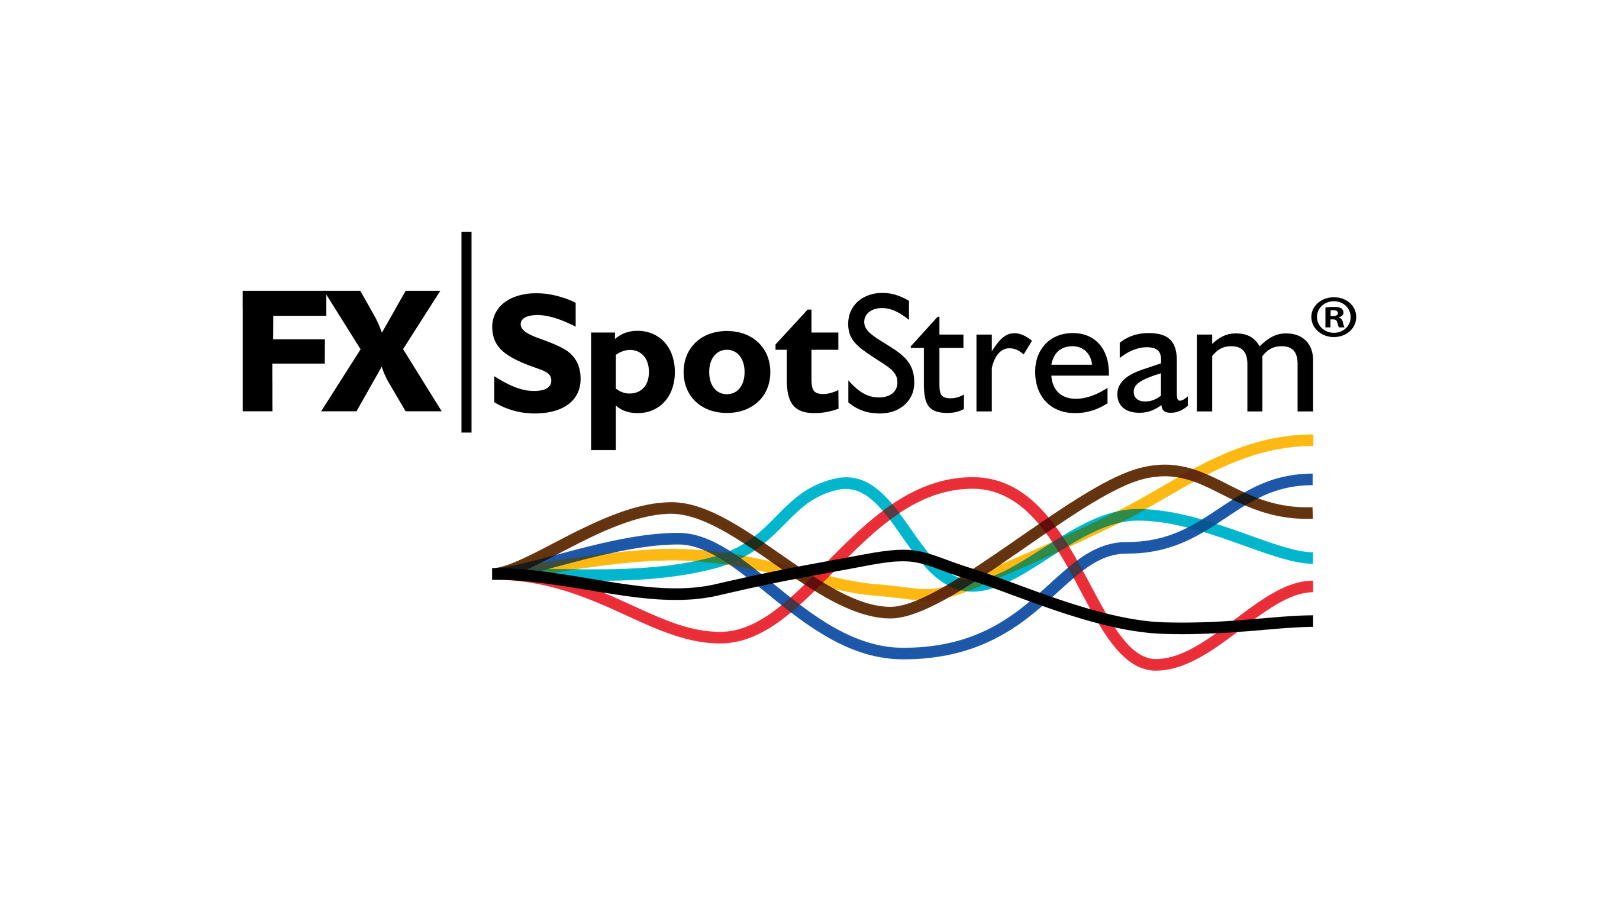 FXSpotStream Releases August Volumes - ADV Of $60.898 Billion, Up 47.24% YOY